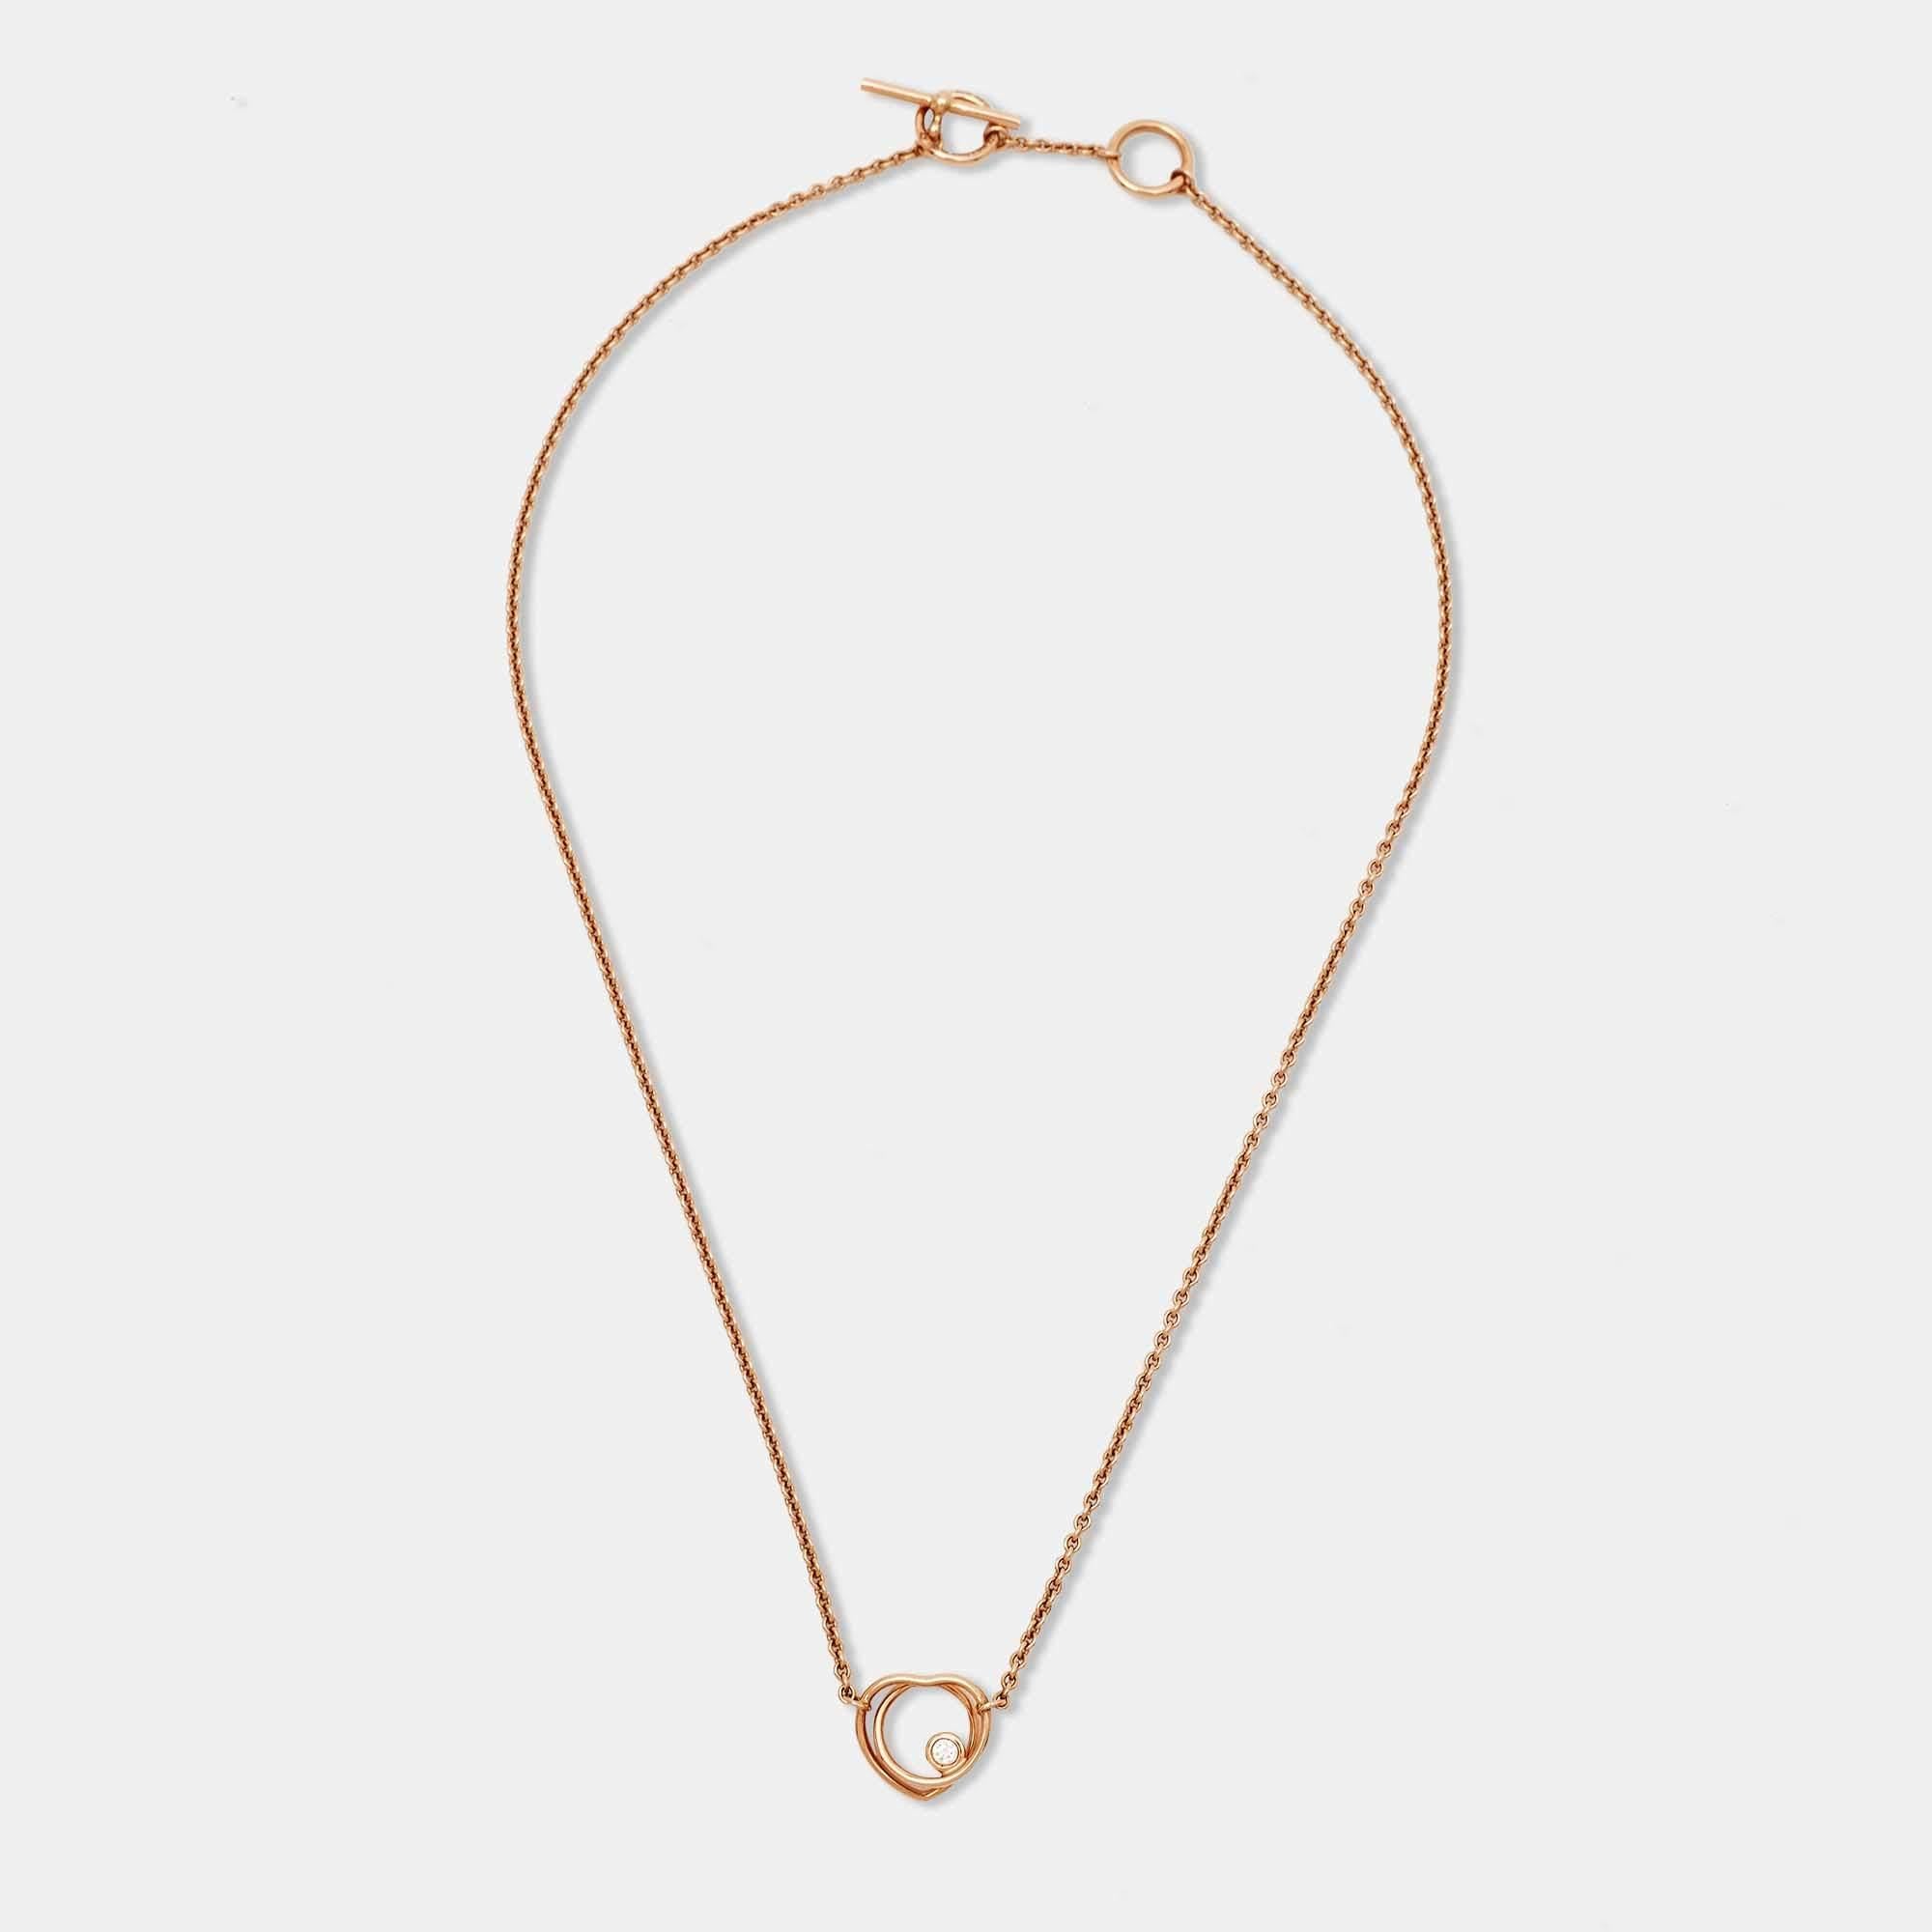 Hermes is a brand that delivers crafts with art and creativity. All their designs have a high-end blend of beauty and fashion. This exquisite necklace has been crafted from the finest selection of materials.

Includes
Original Box